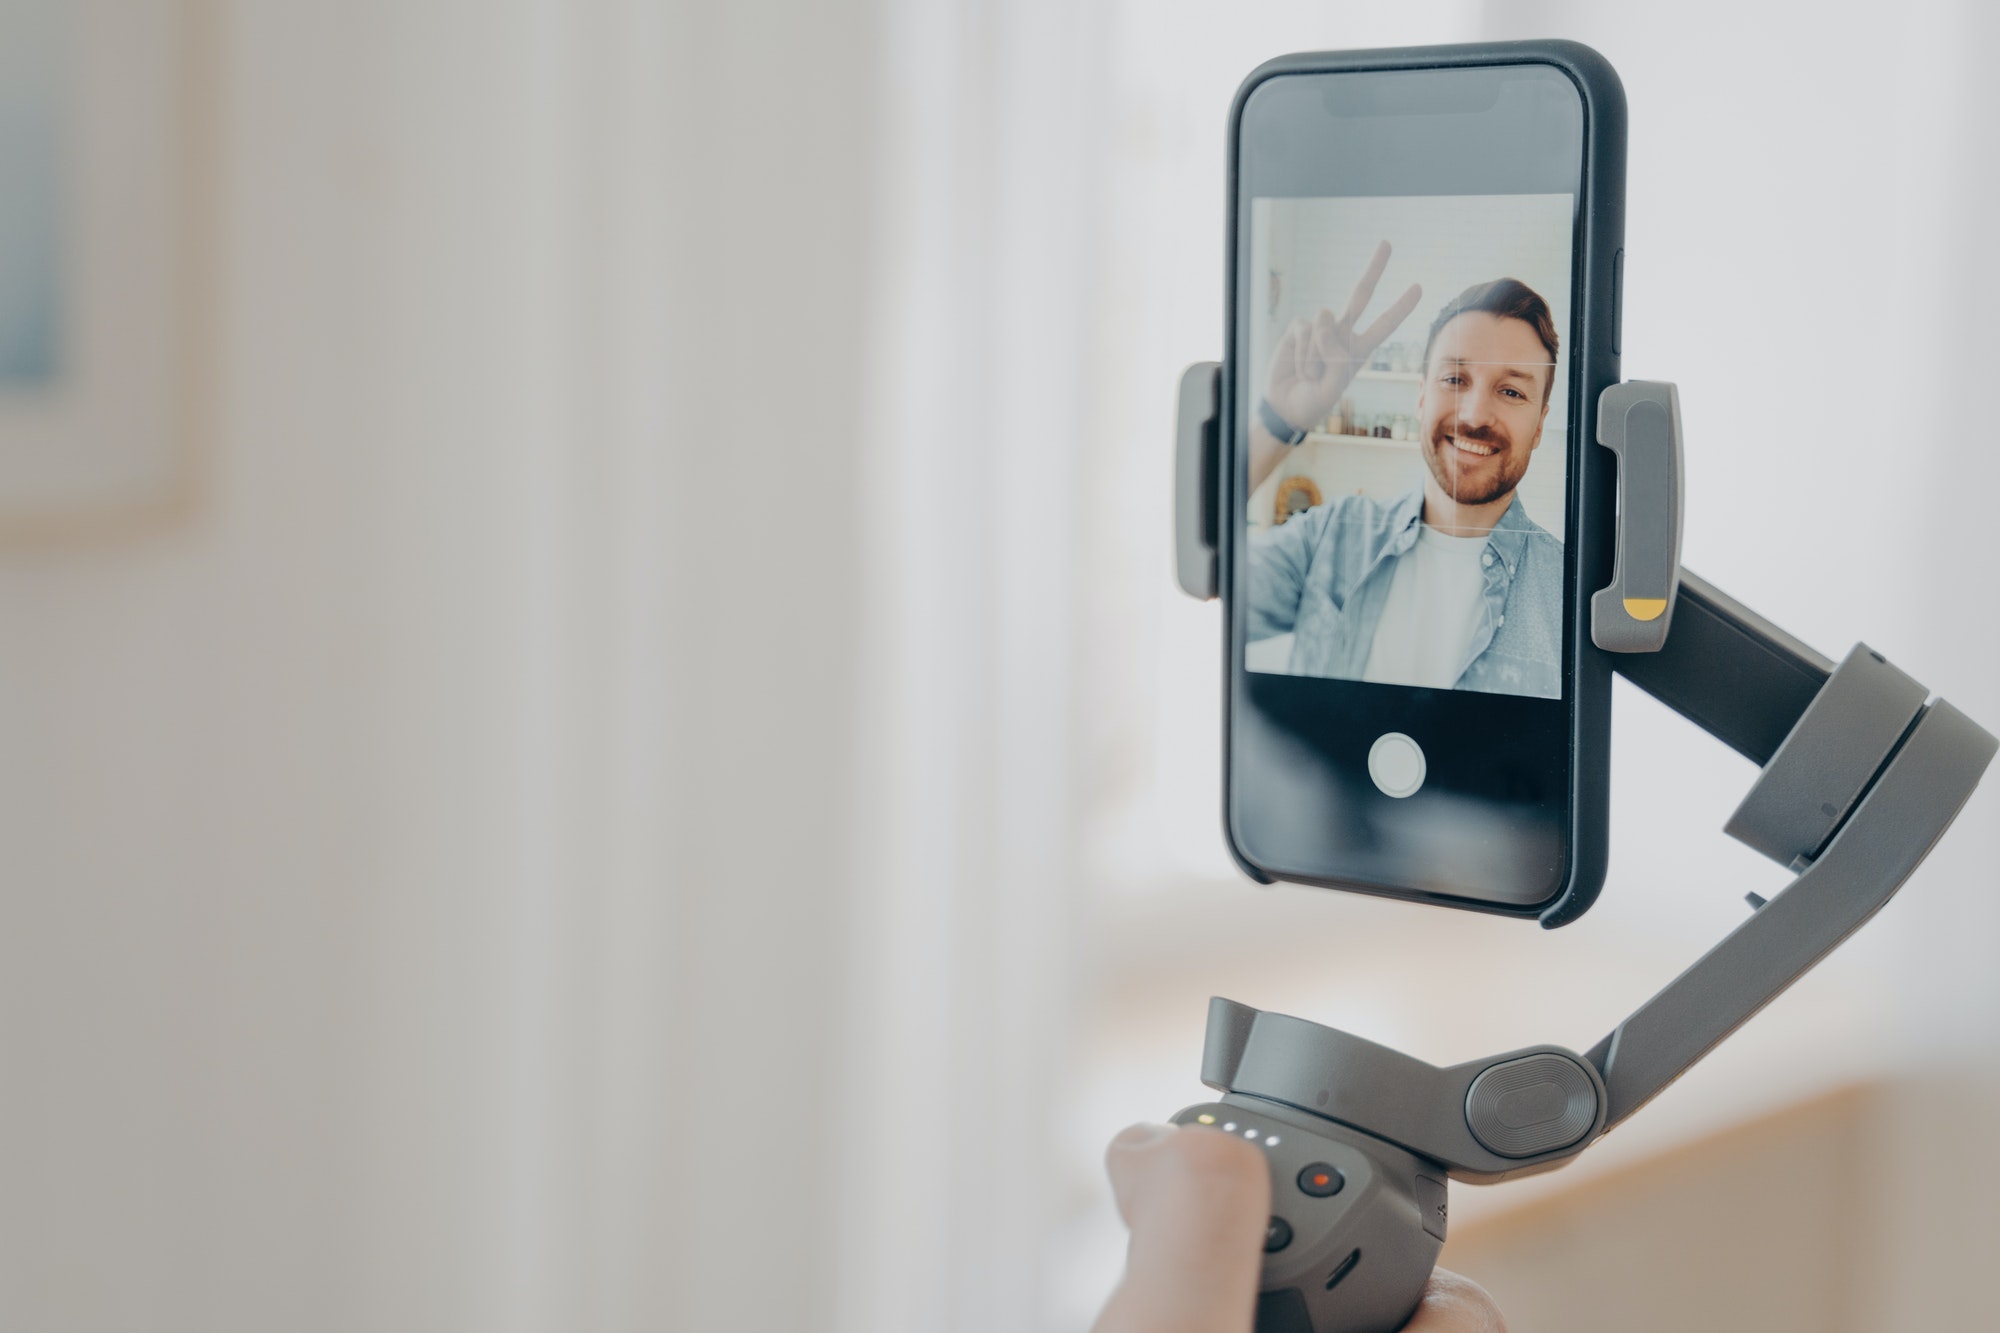 Male hand holding gimbal stabilizer with smartphone and smiling at camera